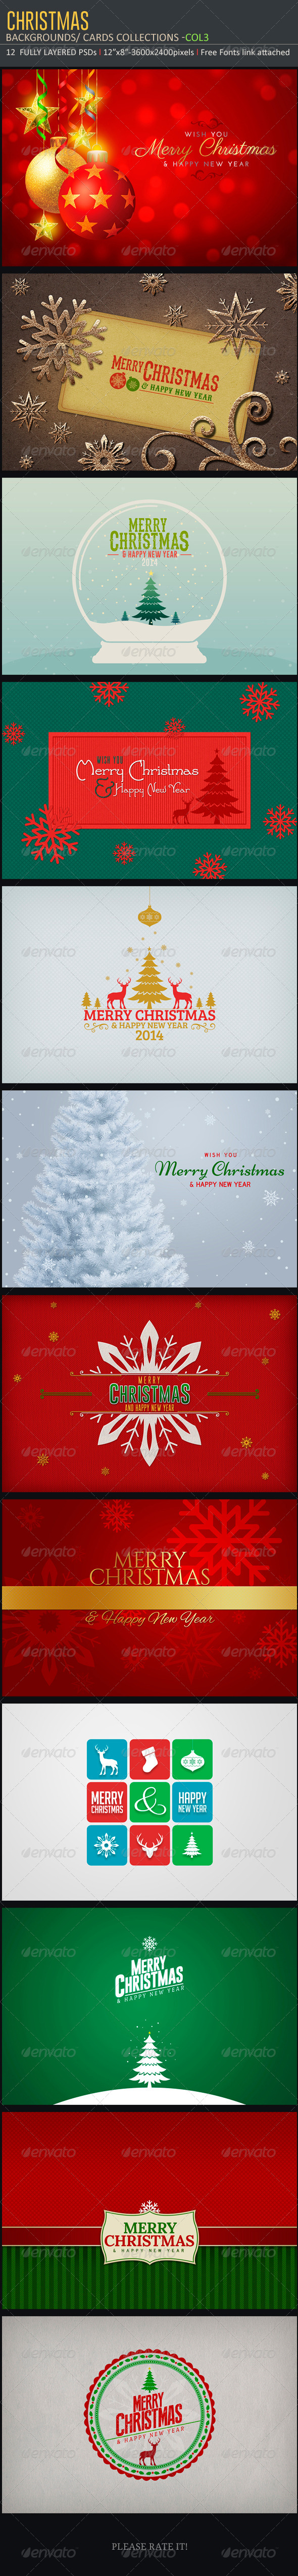 Christmas Backgrounds-Cards -Col3